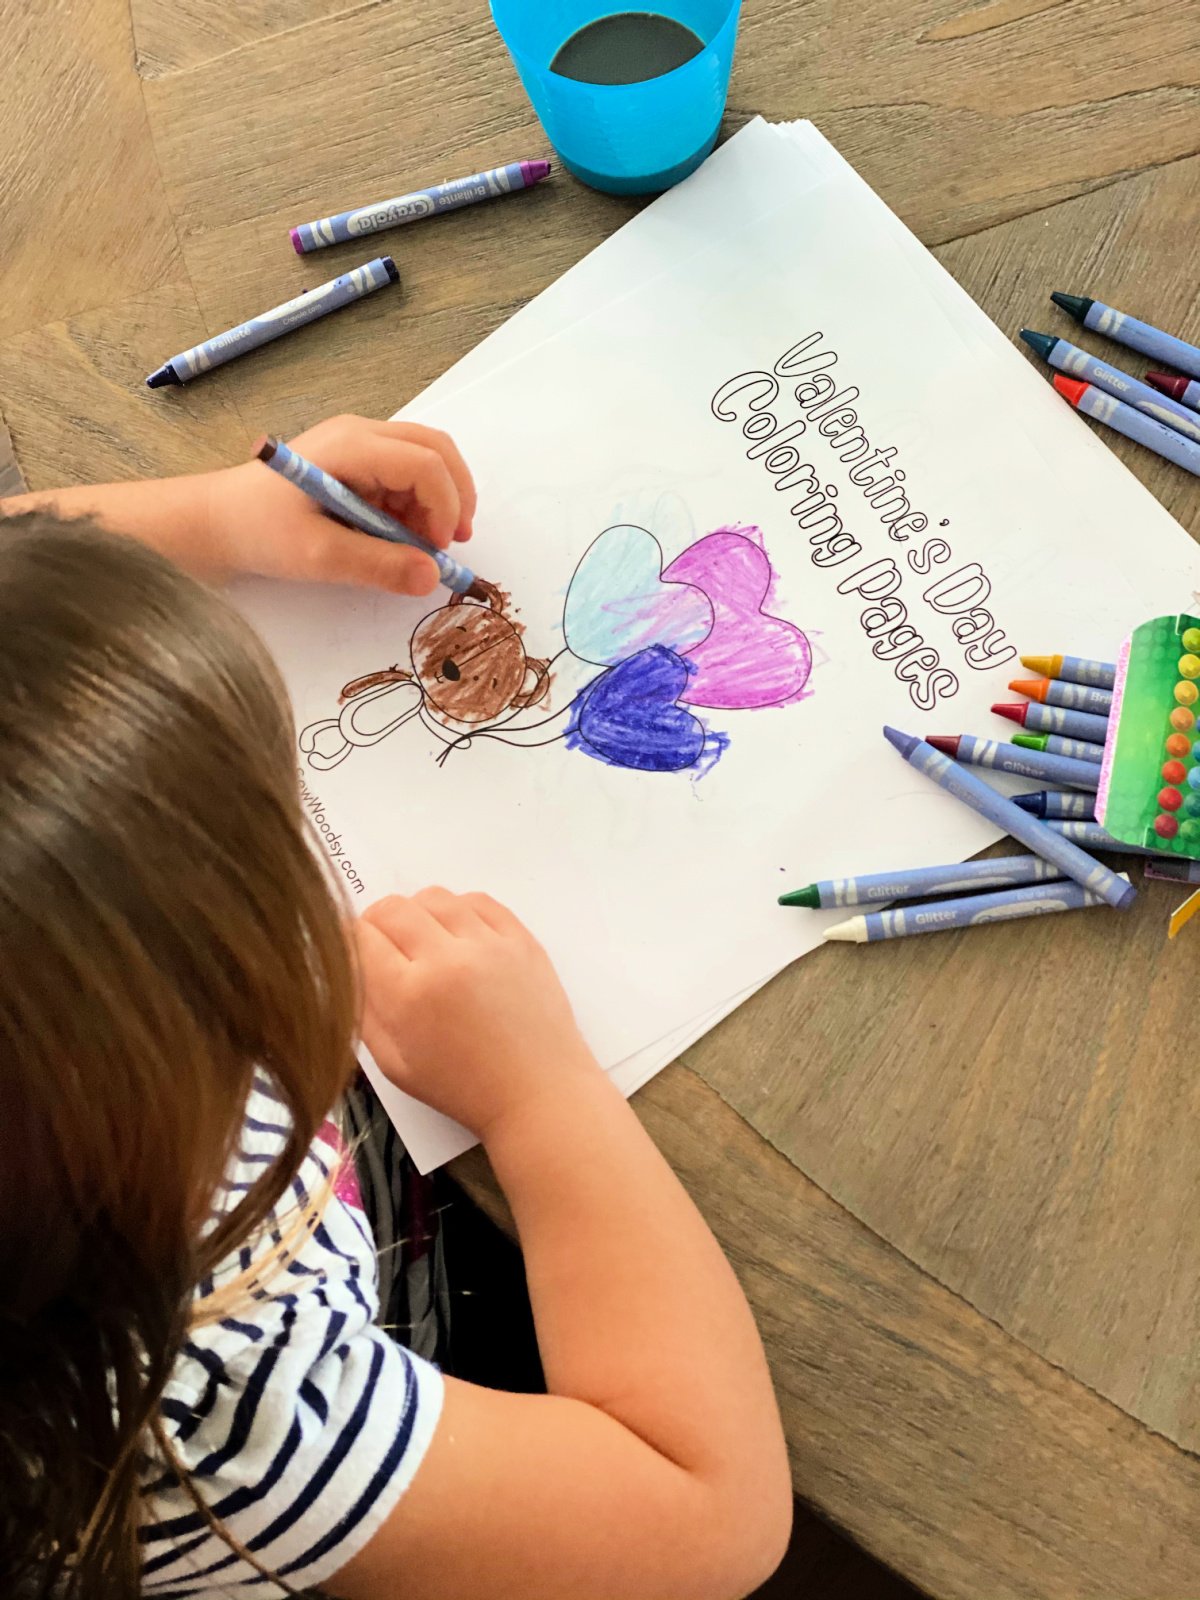 little girl coloring a bair brown holding balloons with crayons scattered on table.